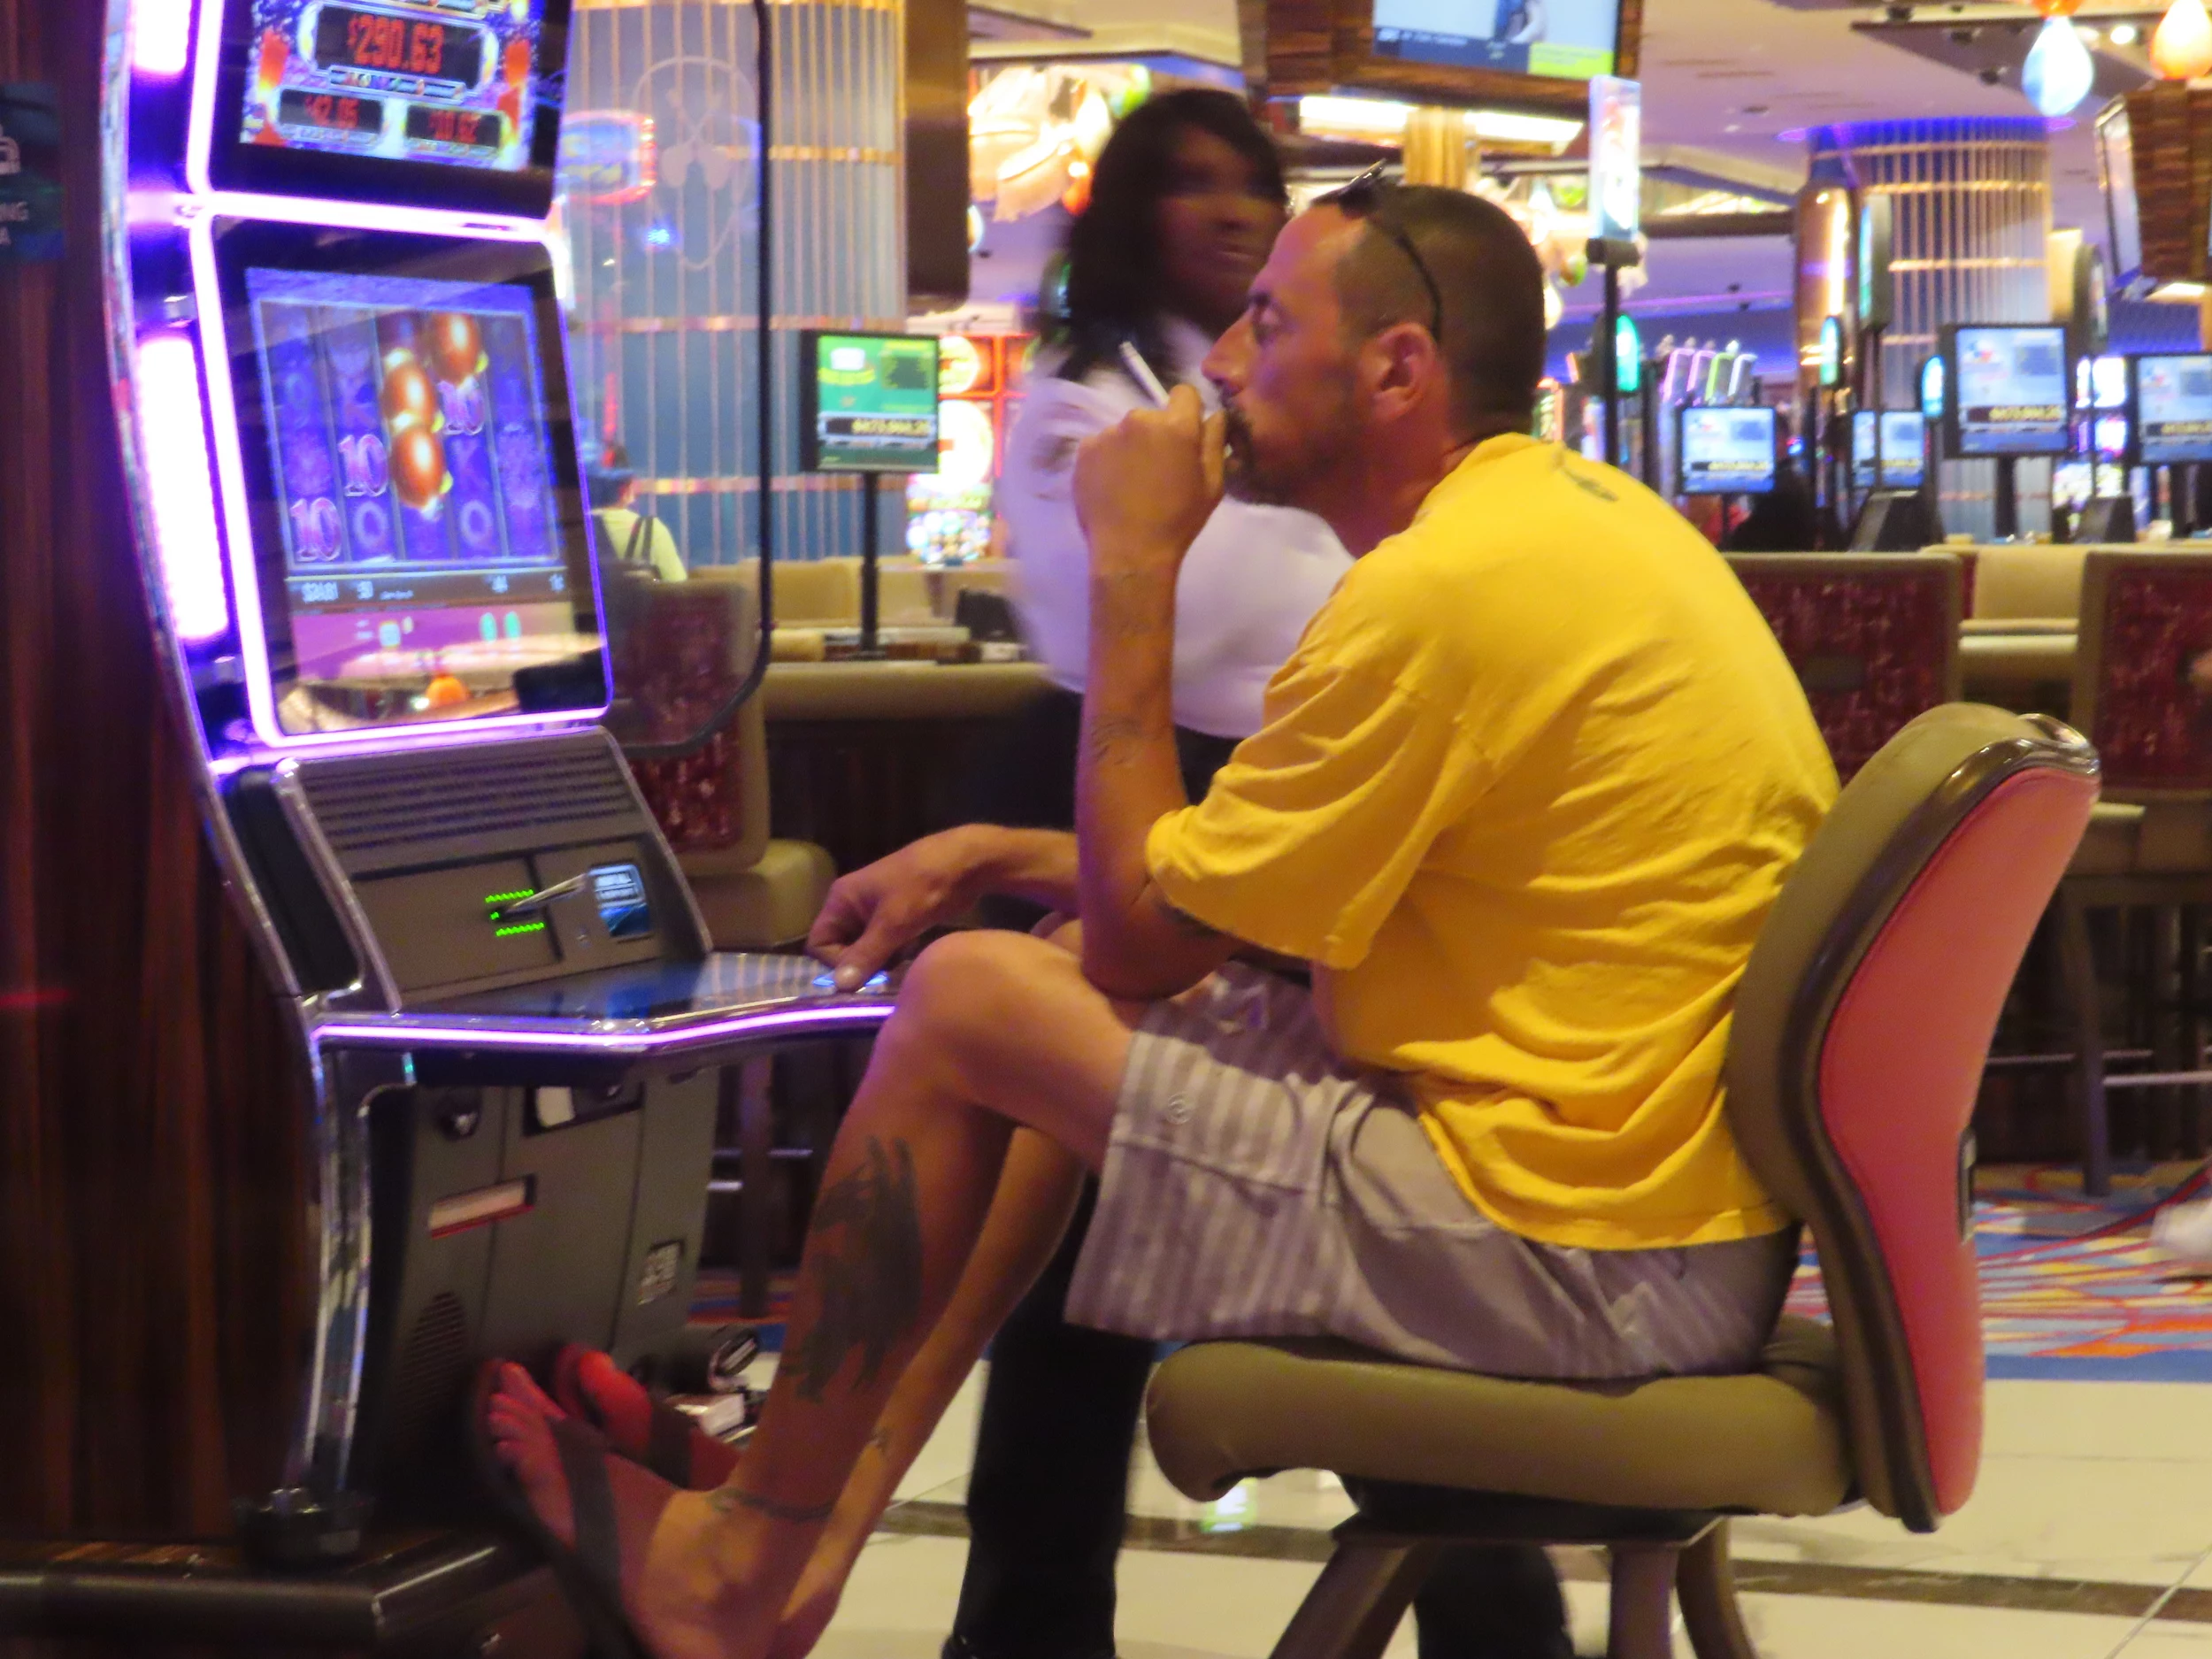 Atlantic City, NJ casino boss pulls out of smoking ban panel
discussion